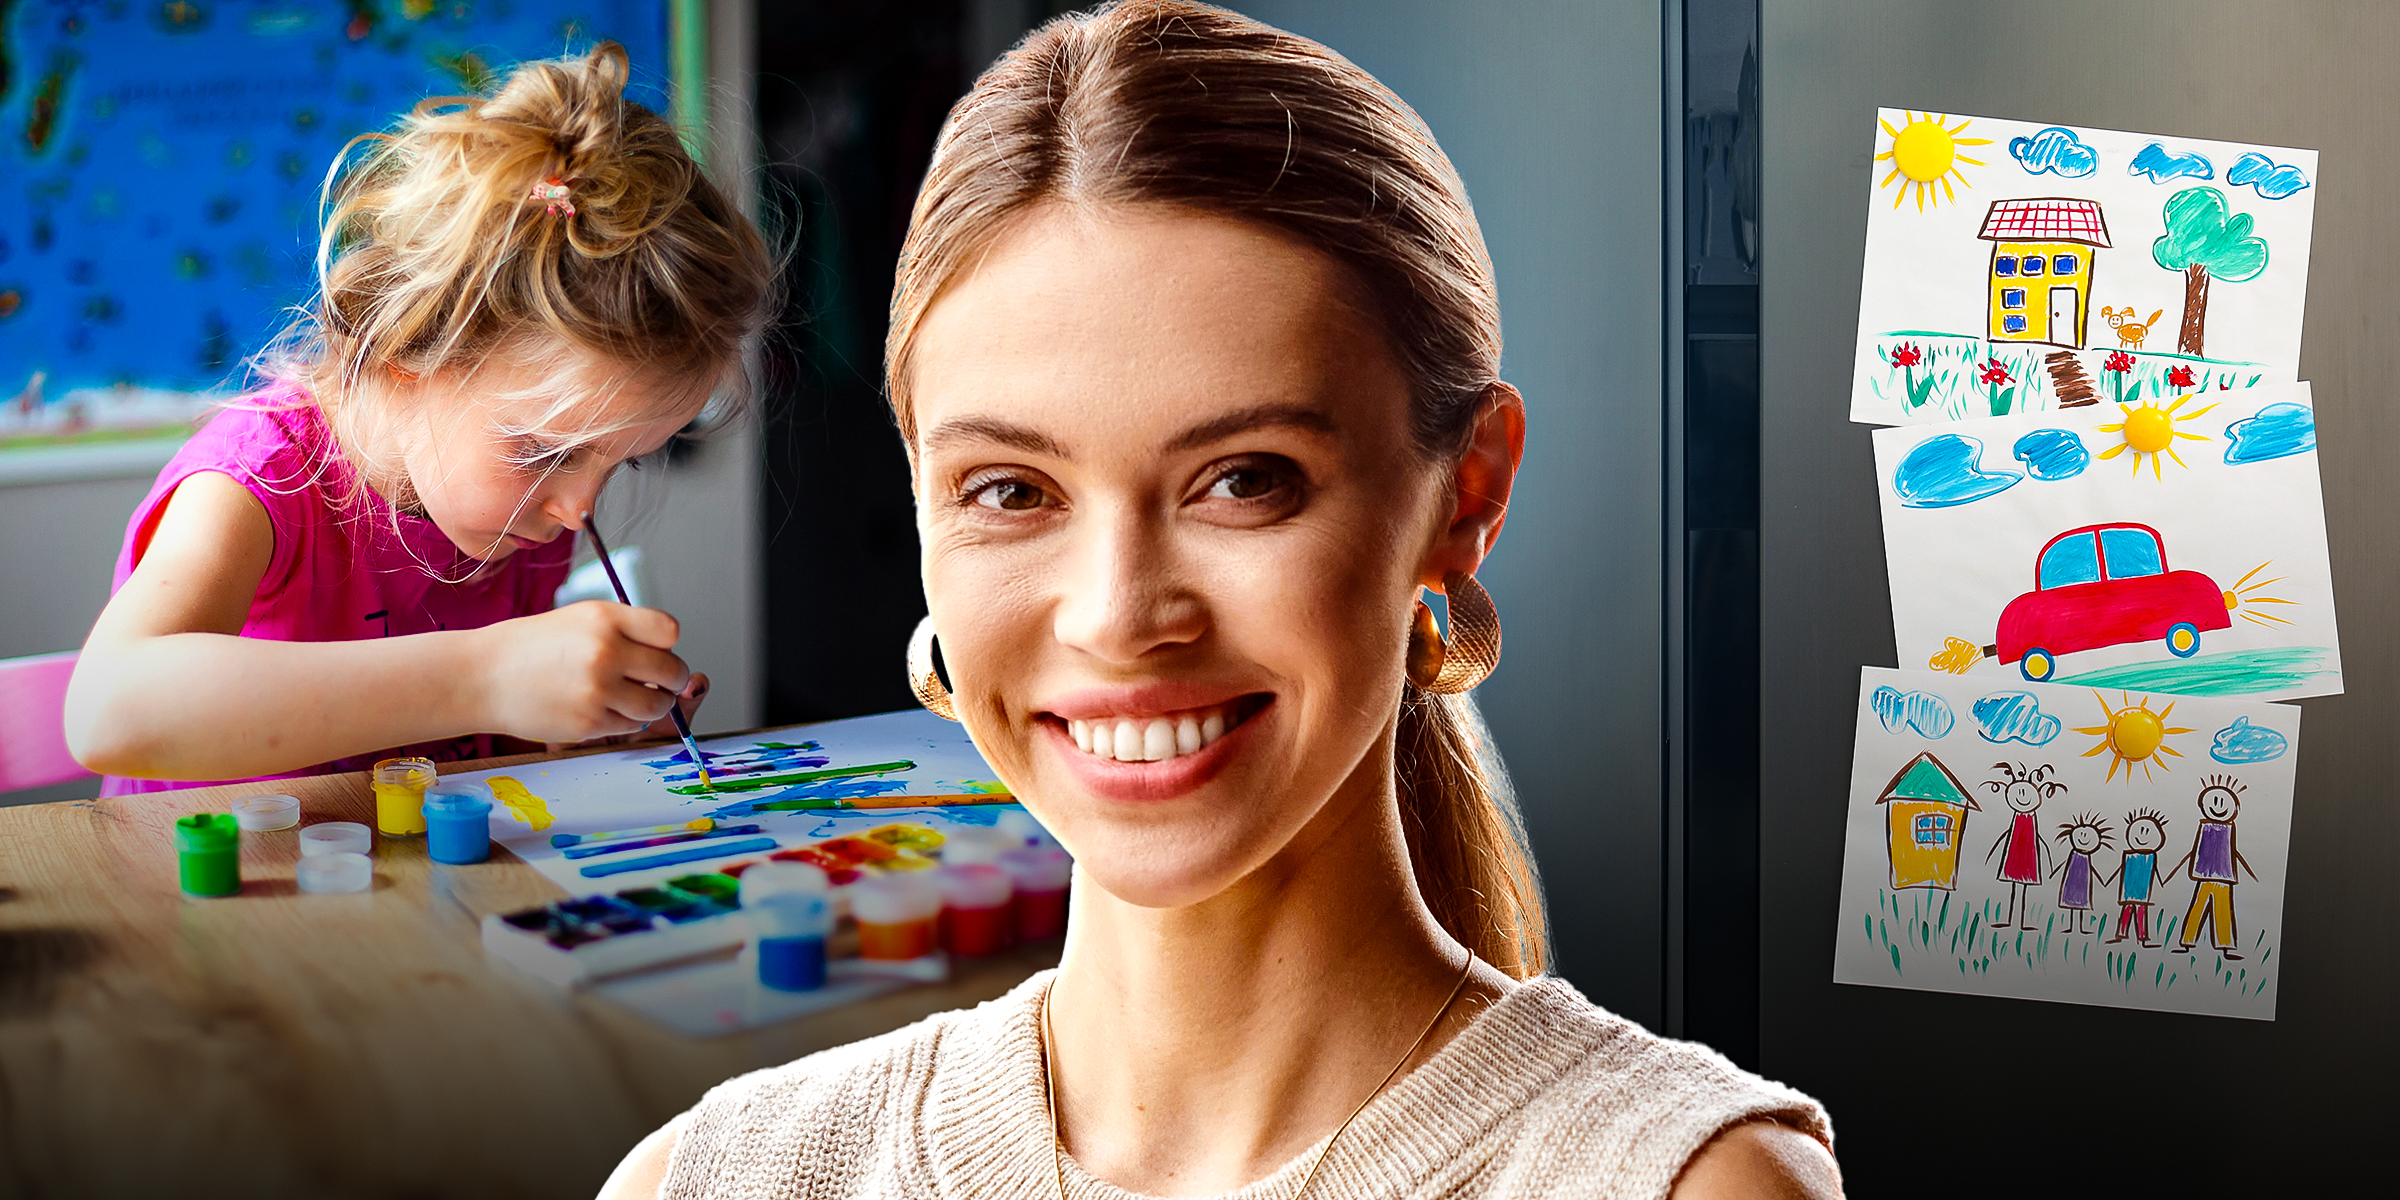 A little girl drawing on a paper | A blonde woman with a ponytail | A kids' drawings | Source: Shutterstock